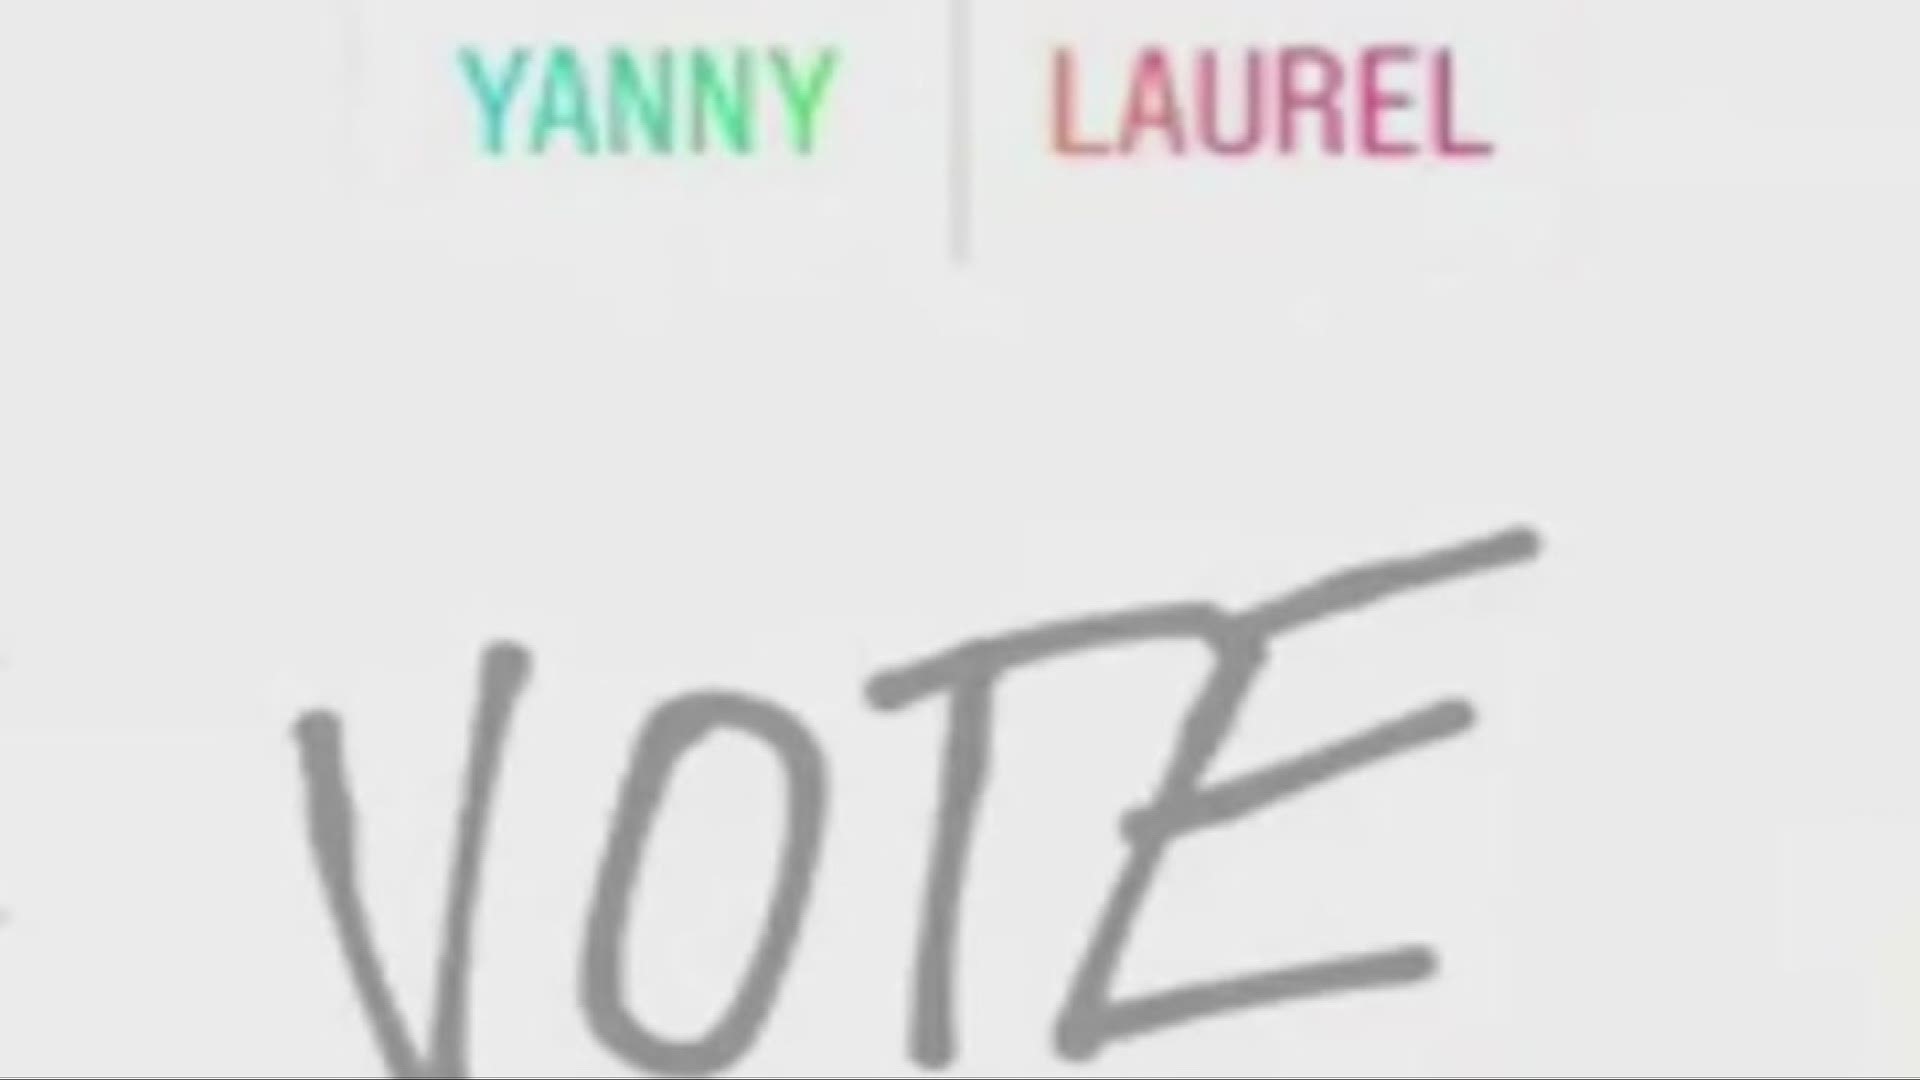 May 16, 2018: An audio clip is taking social media by storm because people can't seem to agree if it's saying "Yanny" or "Laurel." What are you hearing?